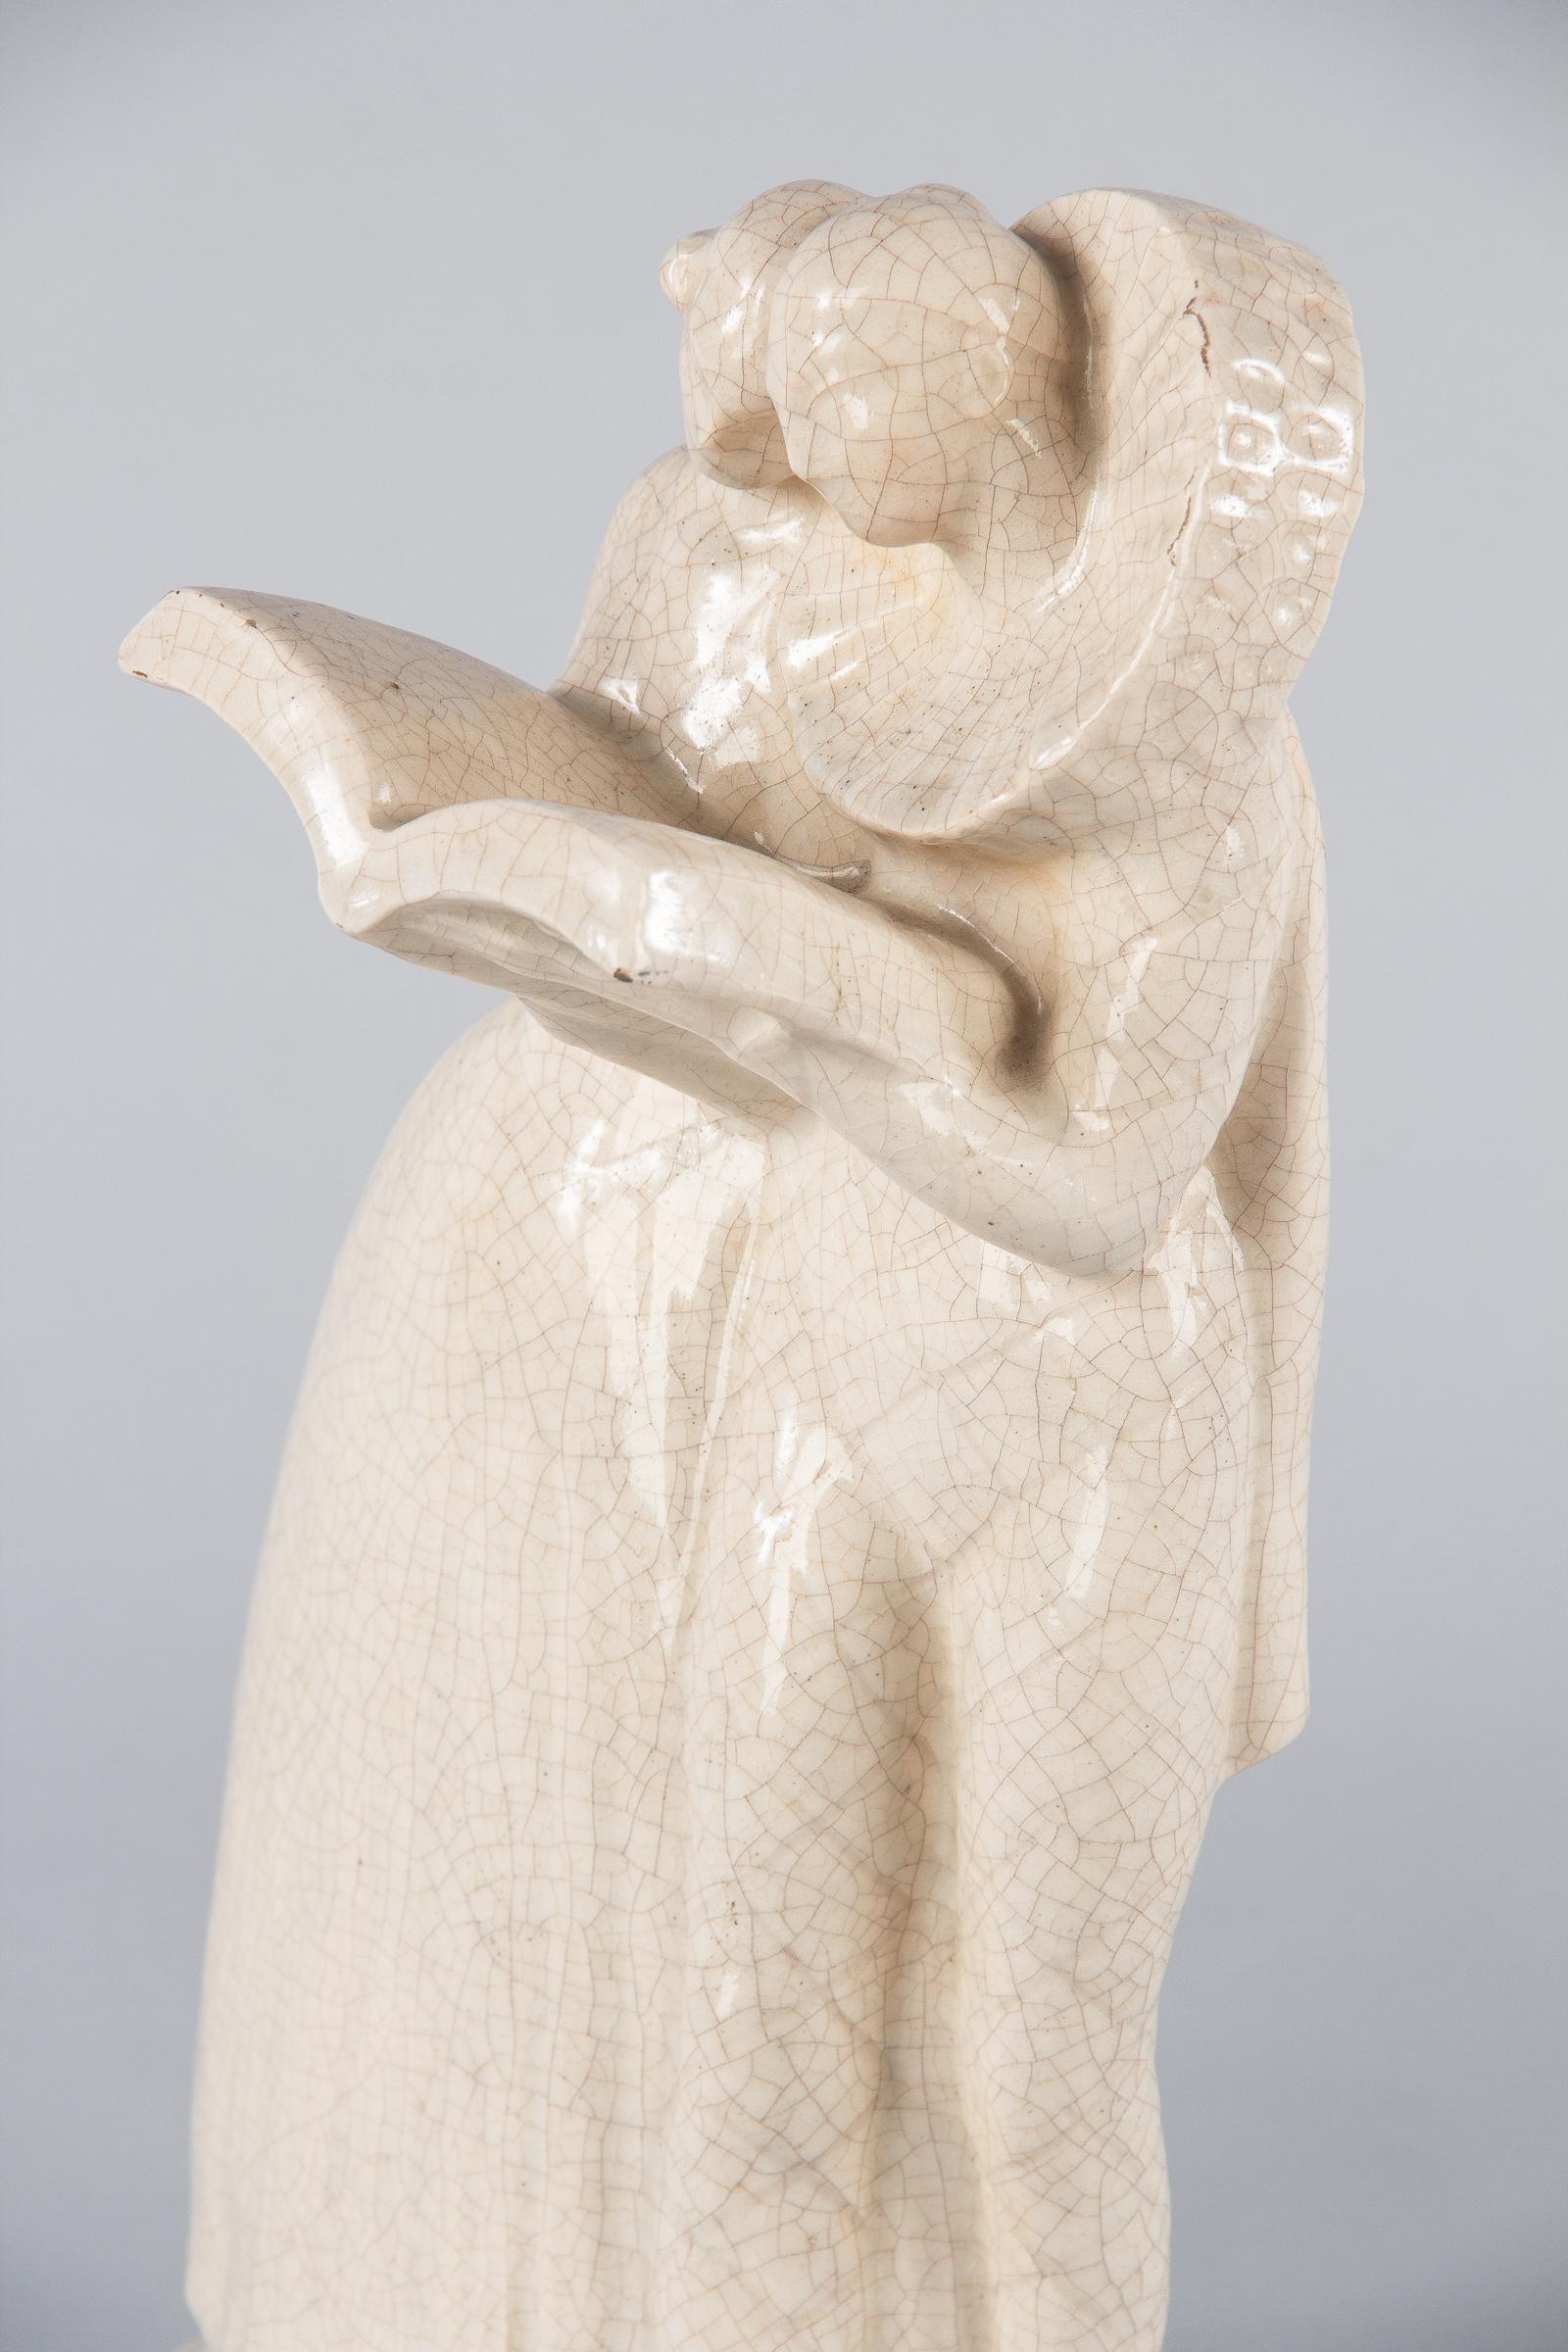 French White Crackled Ceramic Statuette, circa 1930s In Good Condition For Sale In Austin, TX